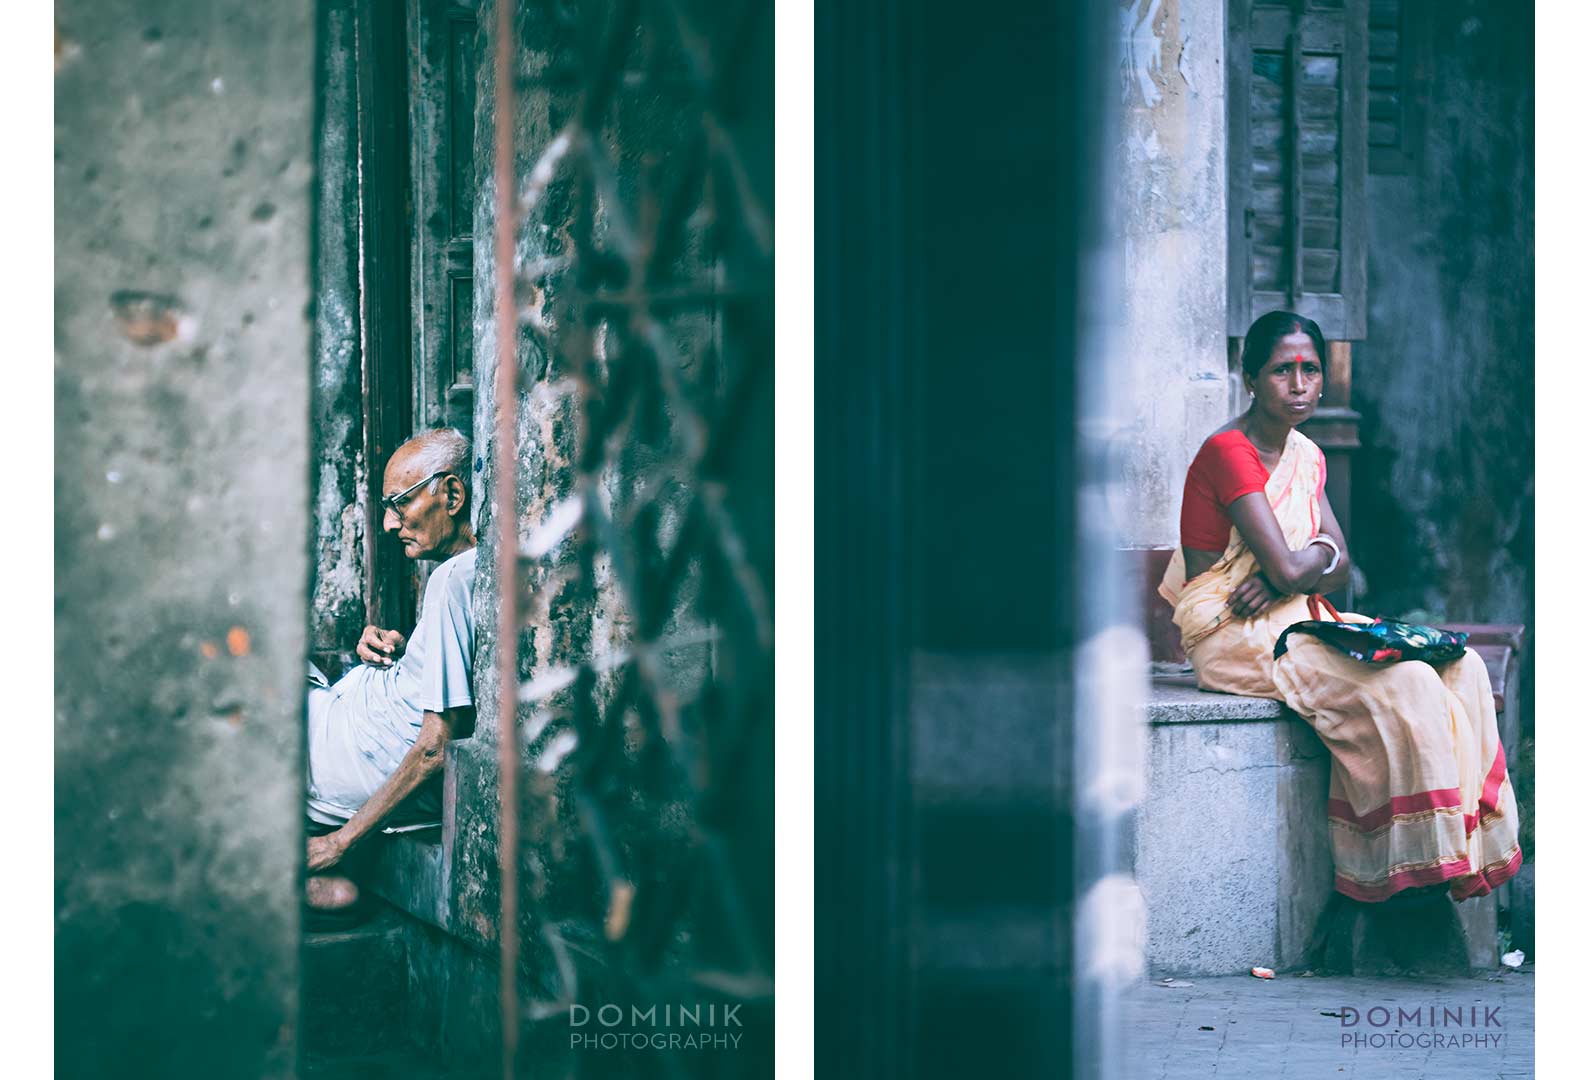 The people of Kolkata through an old lens